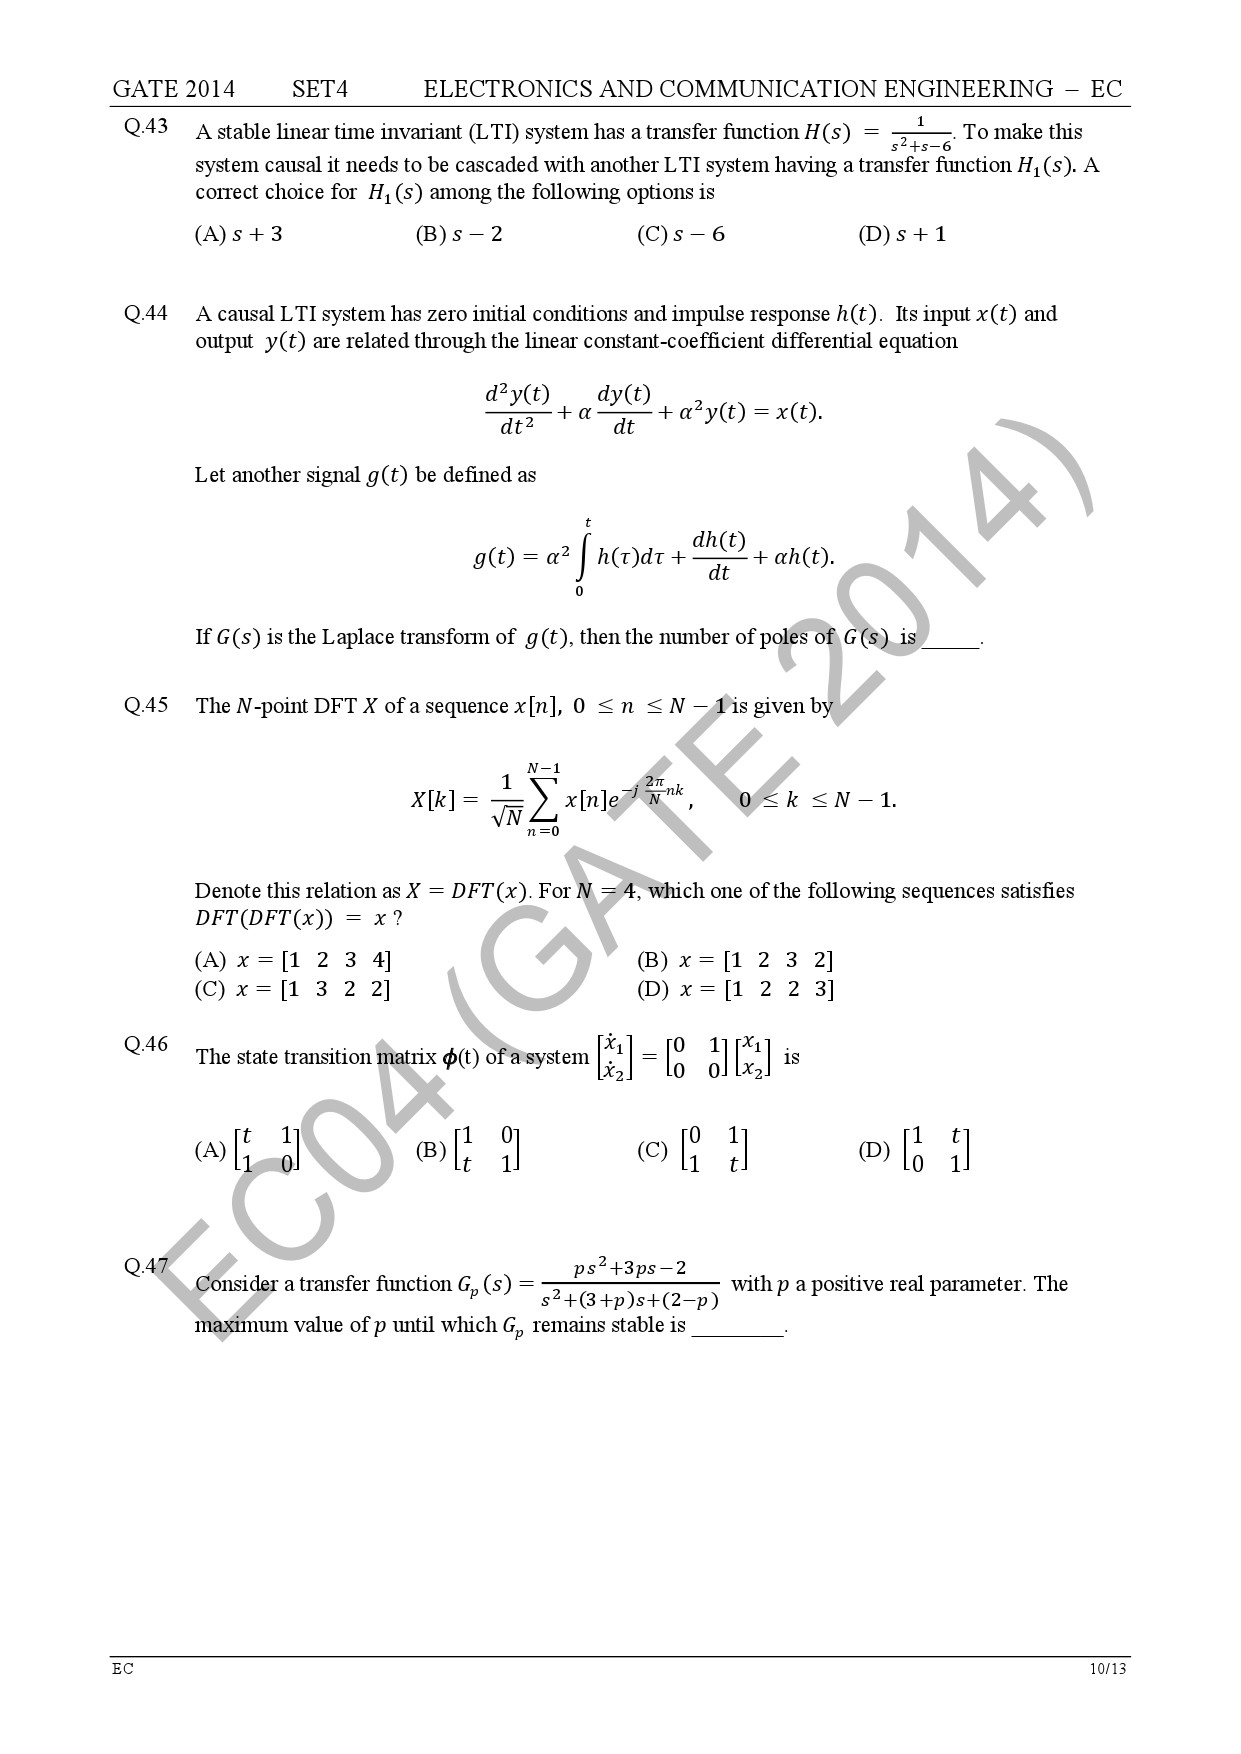 GATE Exam Question Paper 2014 Electronics and Communication Engineering Set 4 16